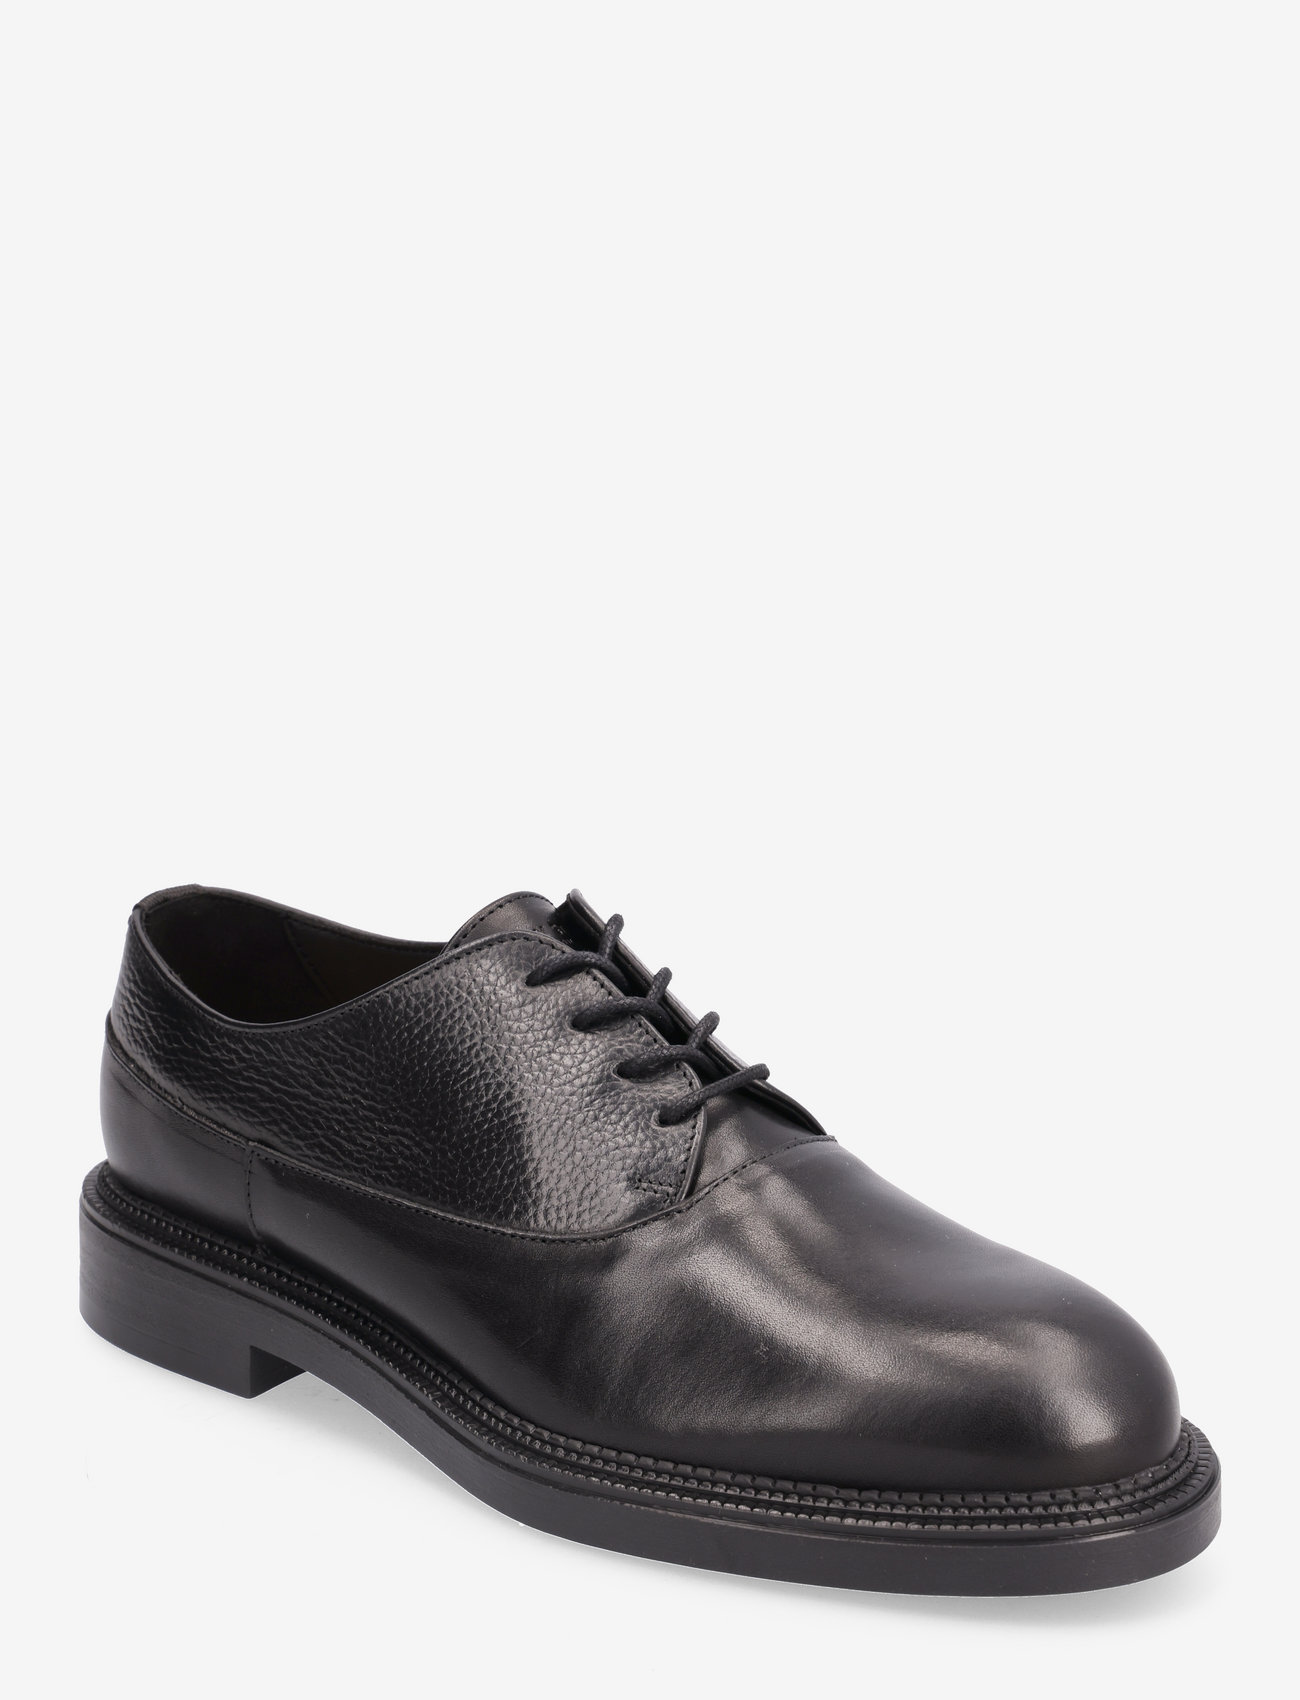 Sneaky Steve Glen Leather Shoe - Laced shoes - Boozt.com